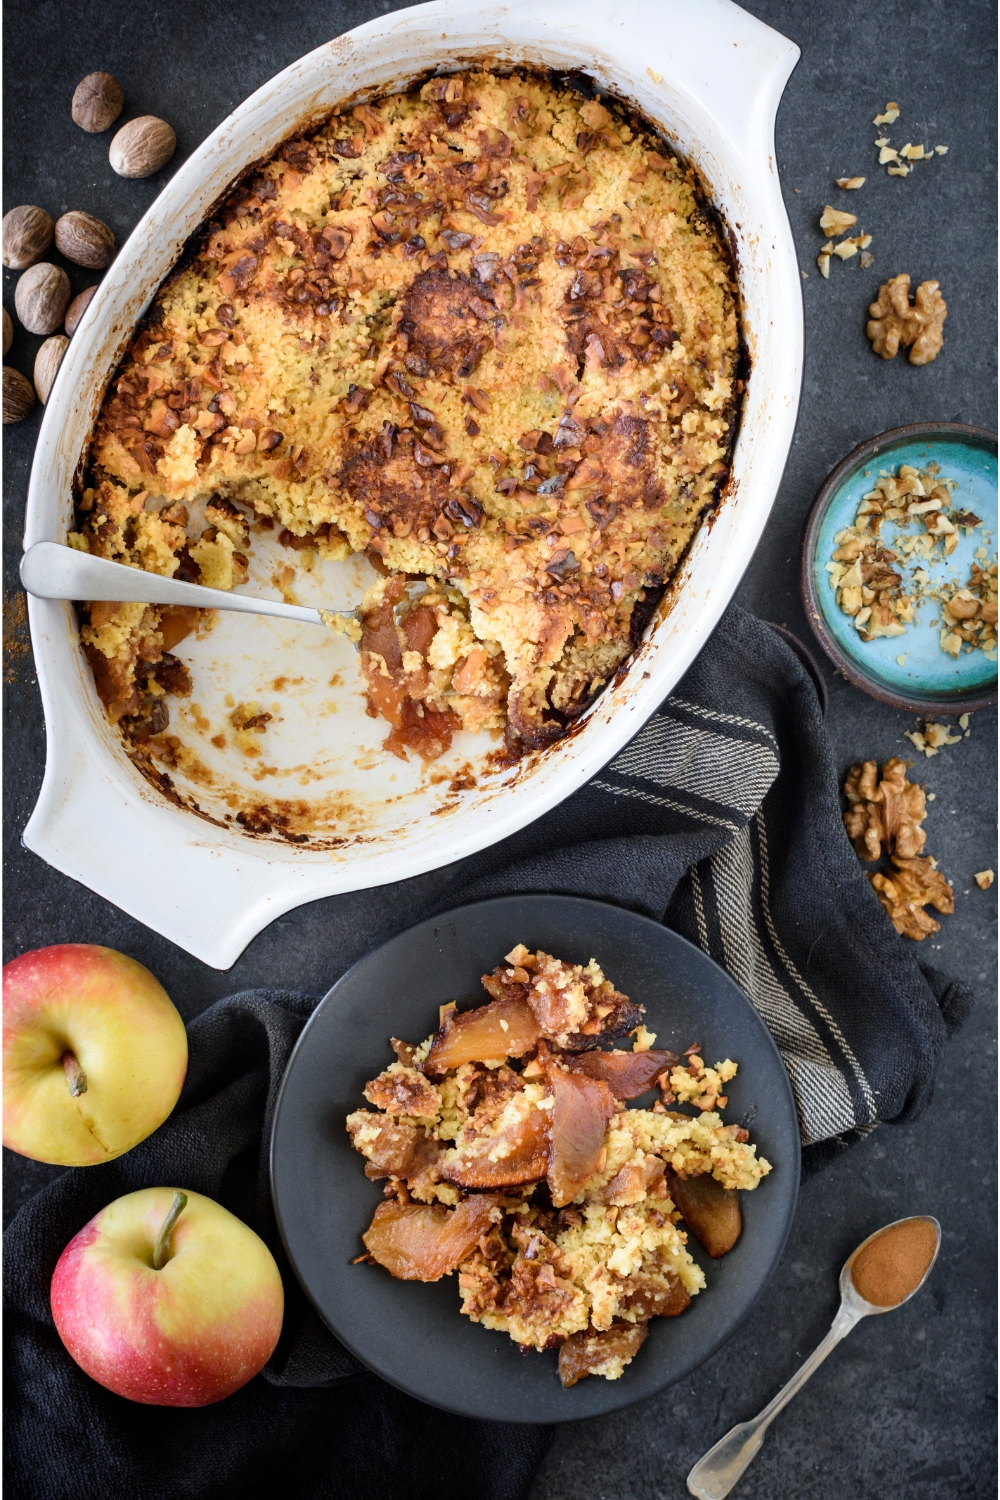 A baking dish filled with apple dump cake and a serving has been scooped out and put on a plate next to the baking dish.